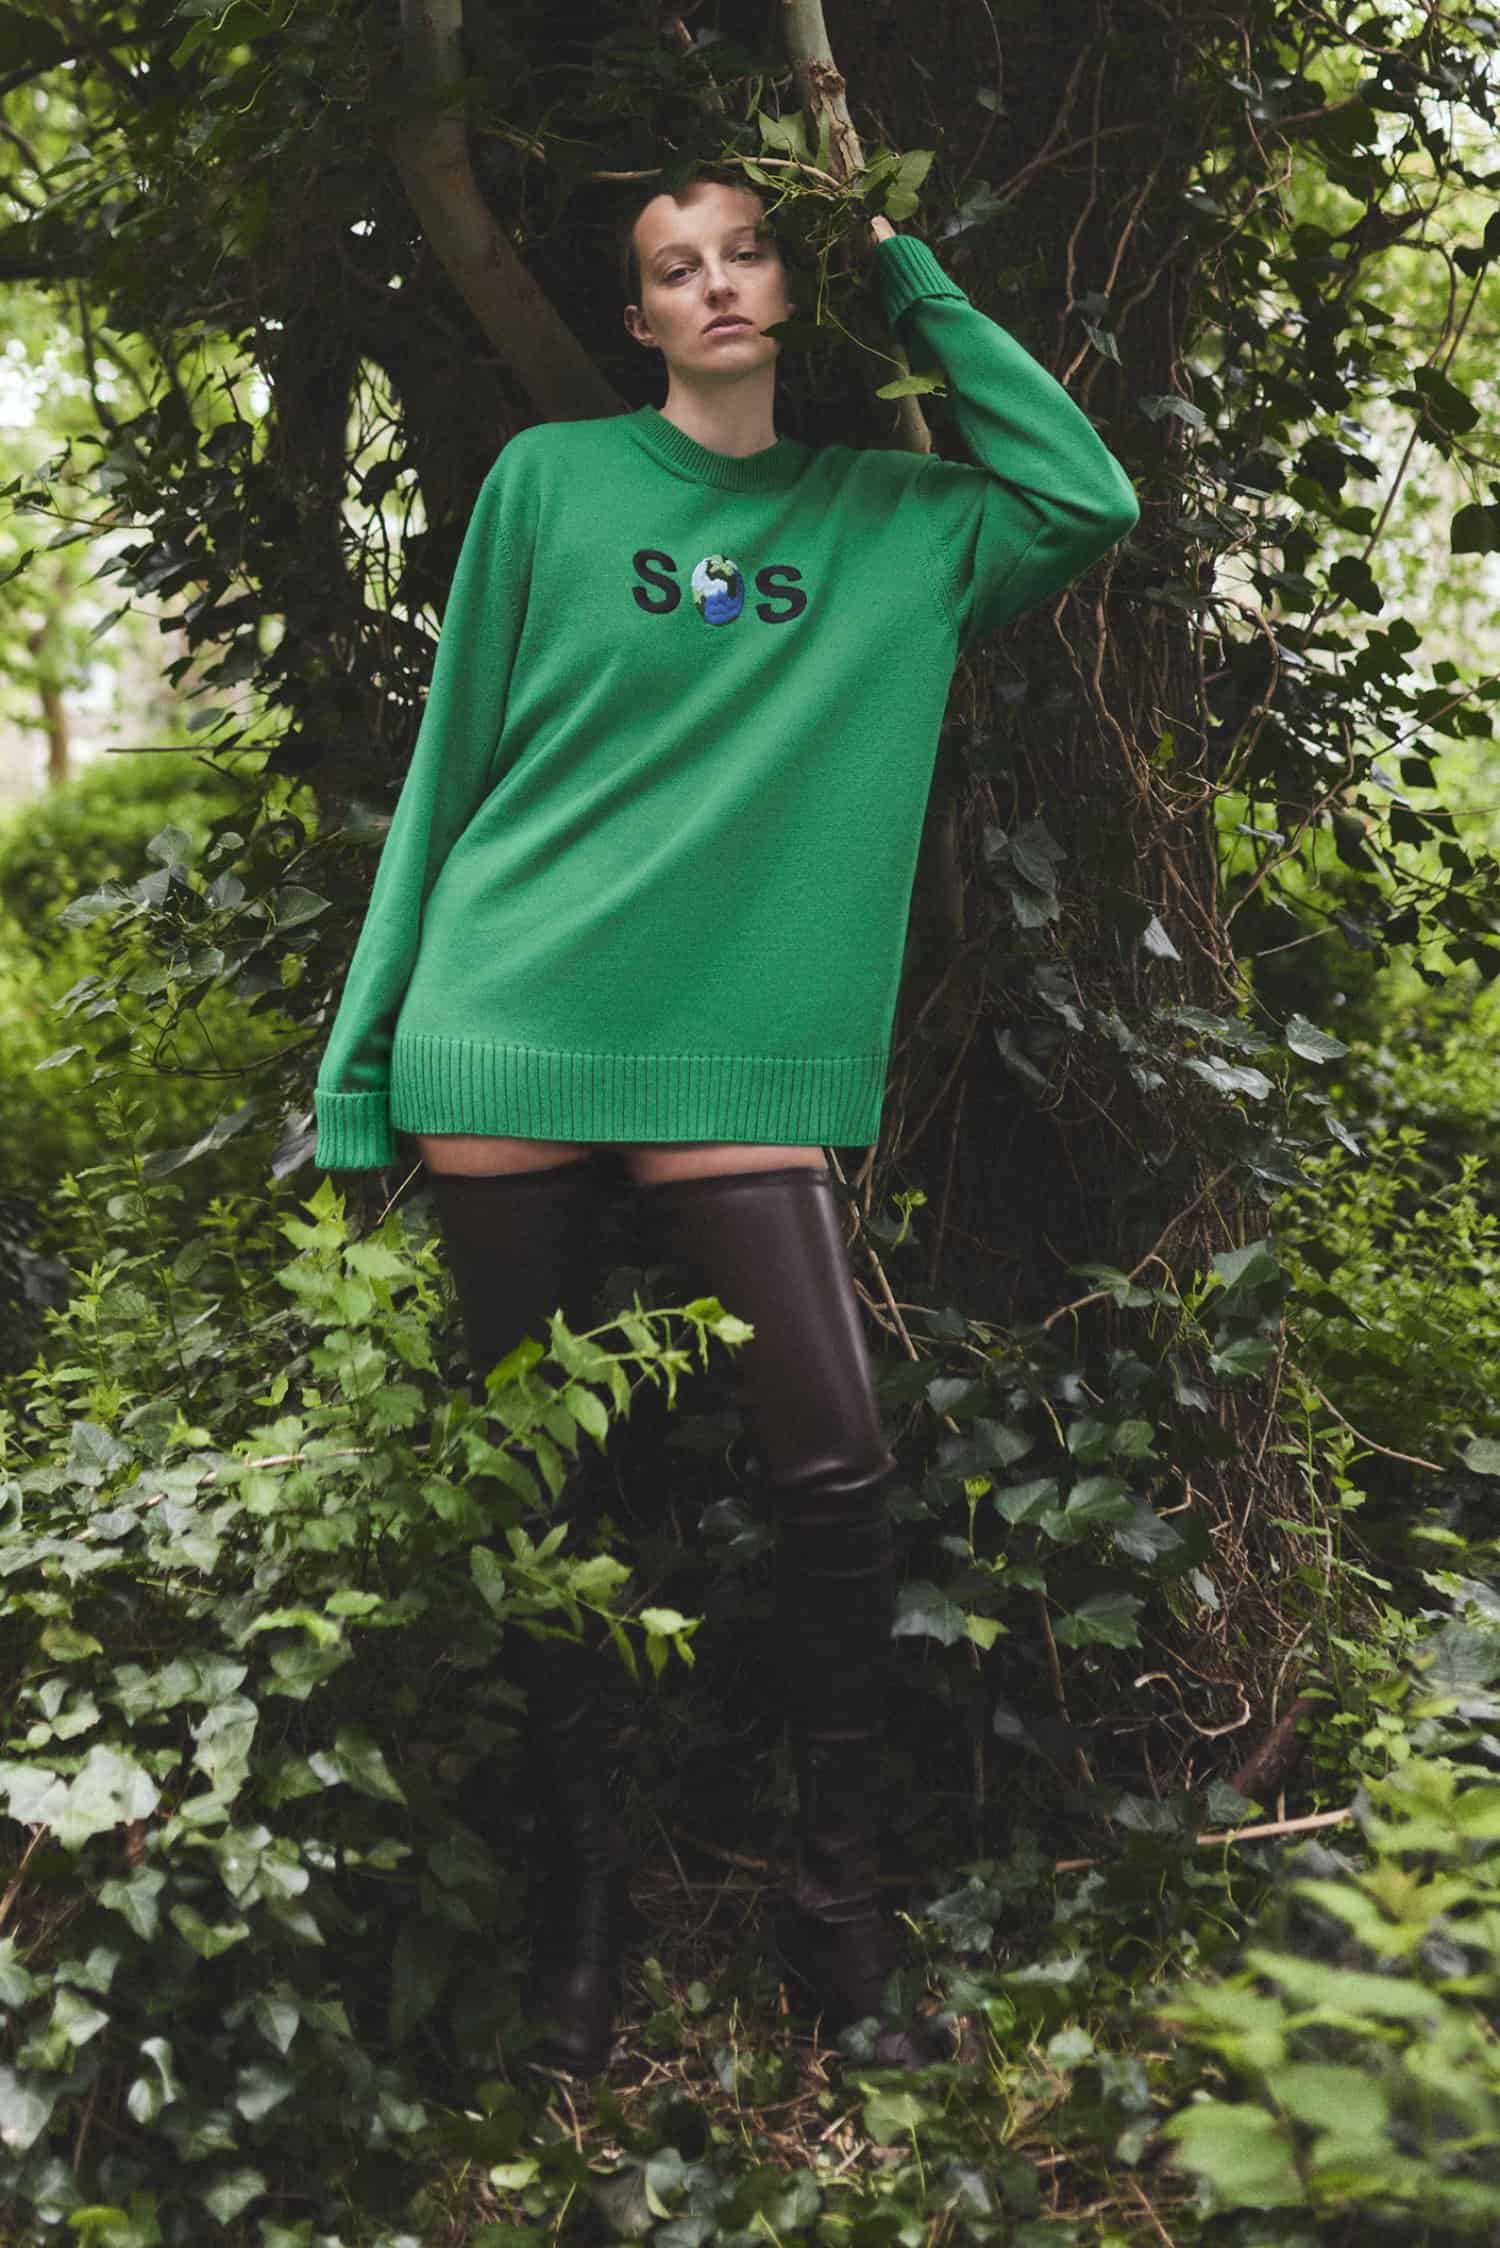 Stella McCartney, SOS, Earth Day, sustainability, sustainable fashion, capsule collection